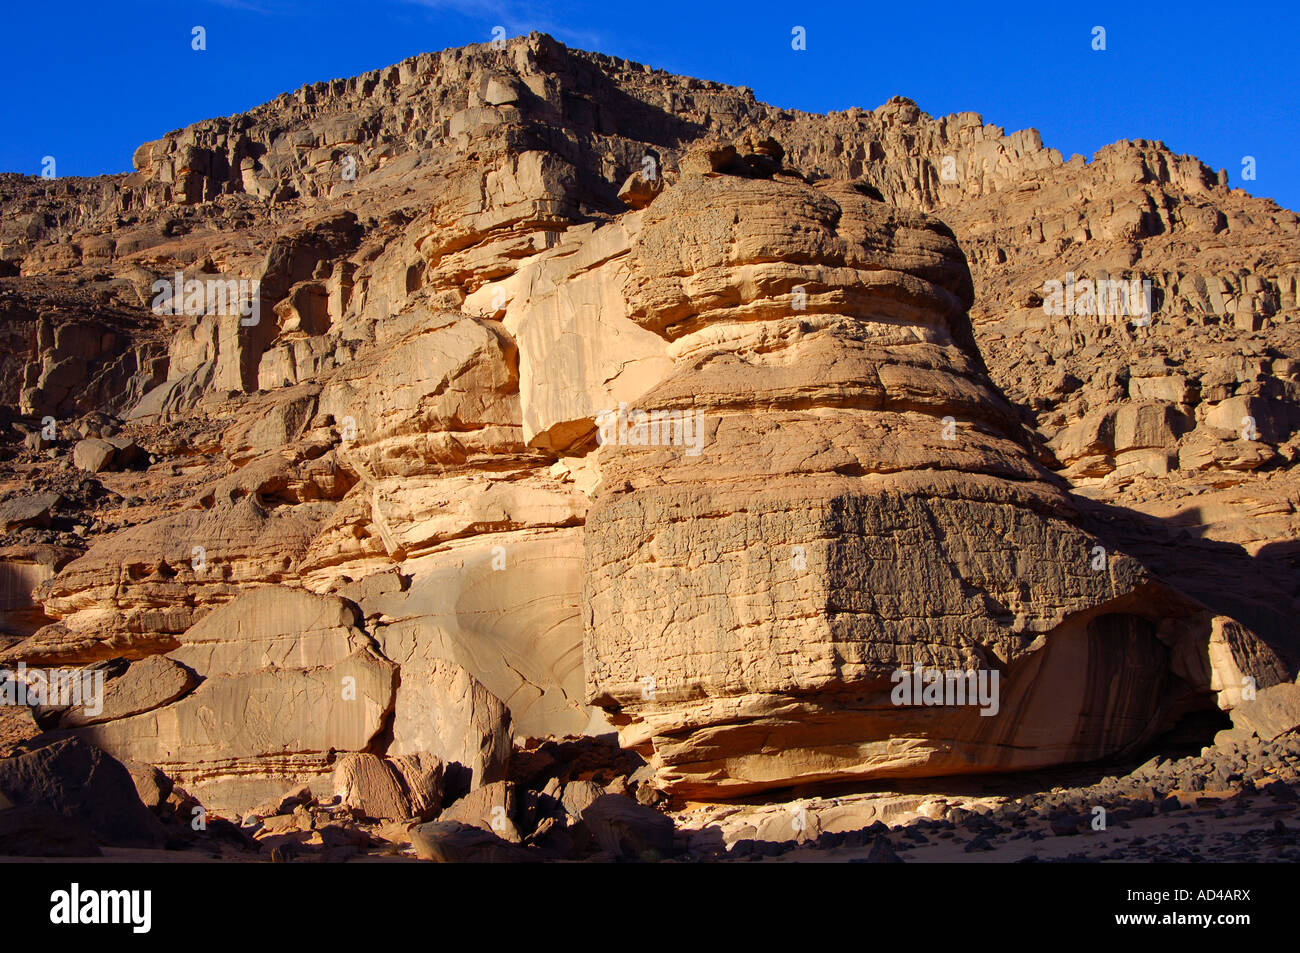 Place of discovery of prehistoric rock paintings in the Acacus Mountains, Libya Stock Photo